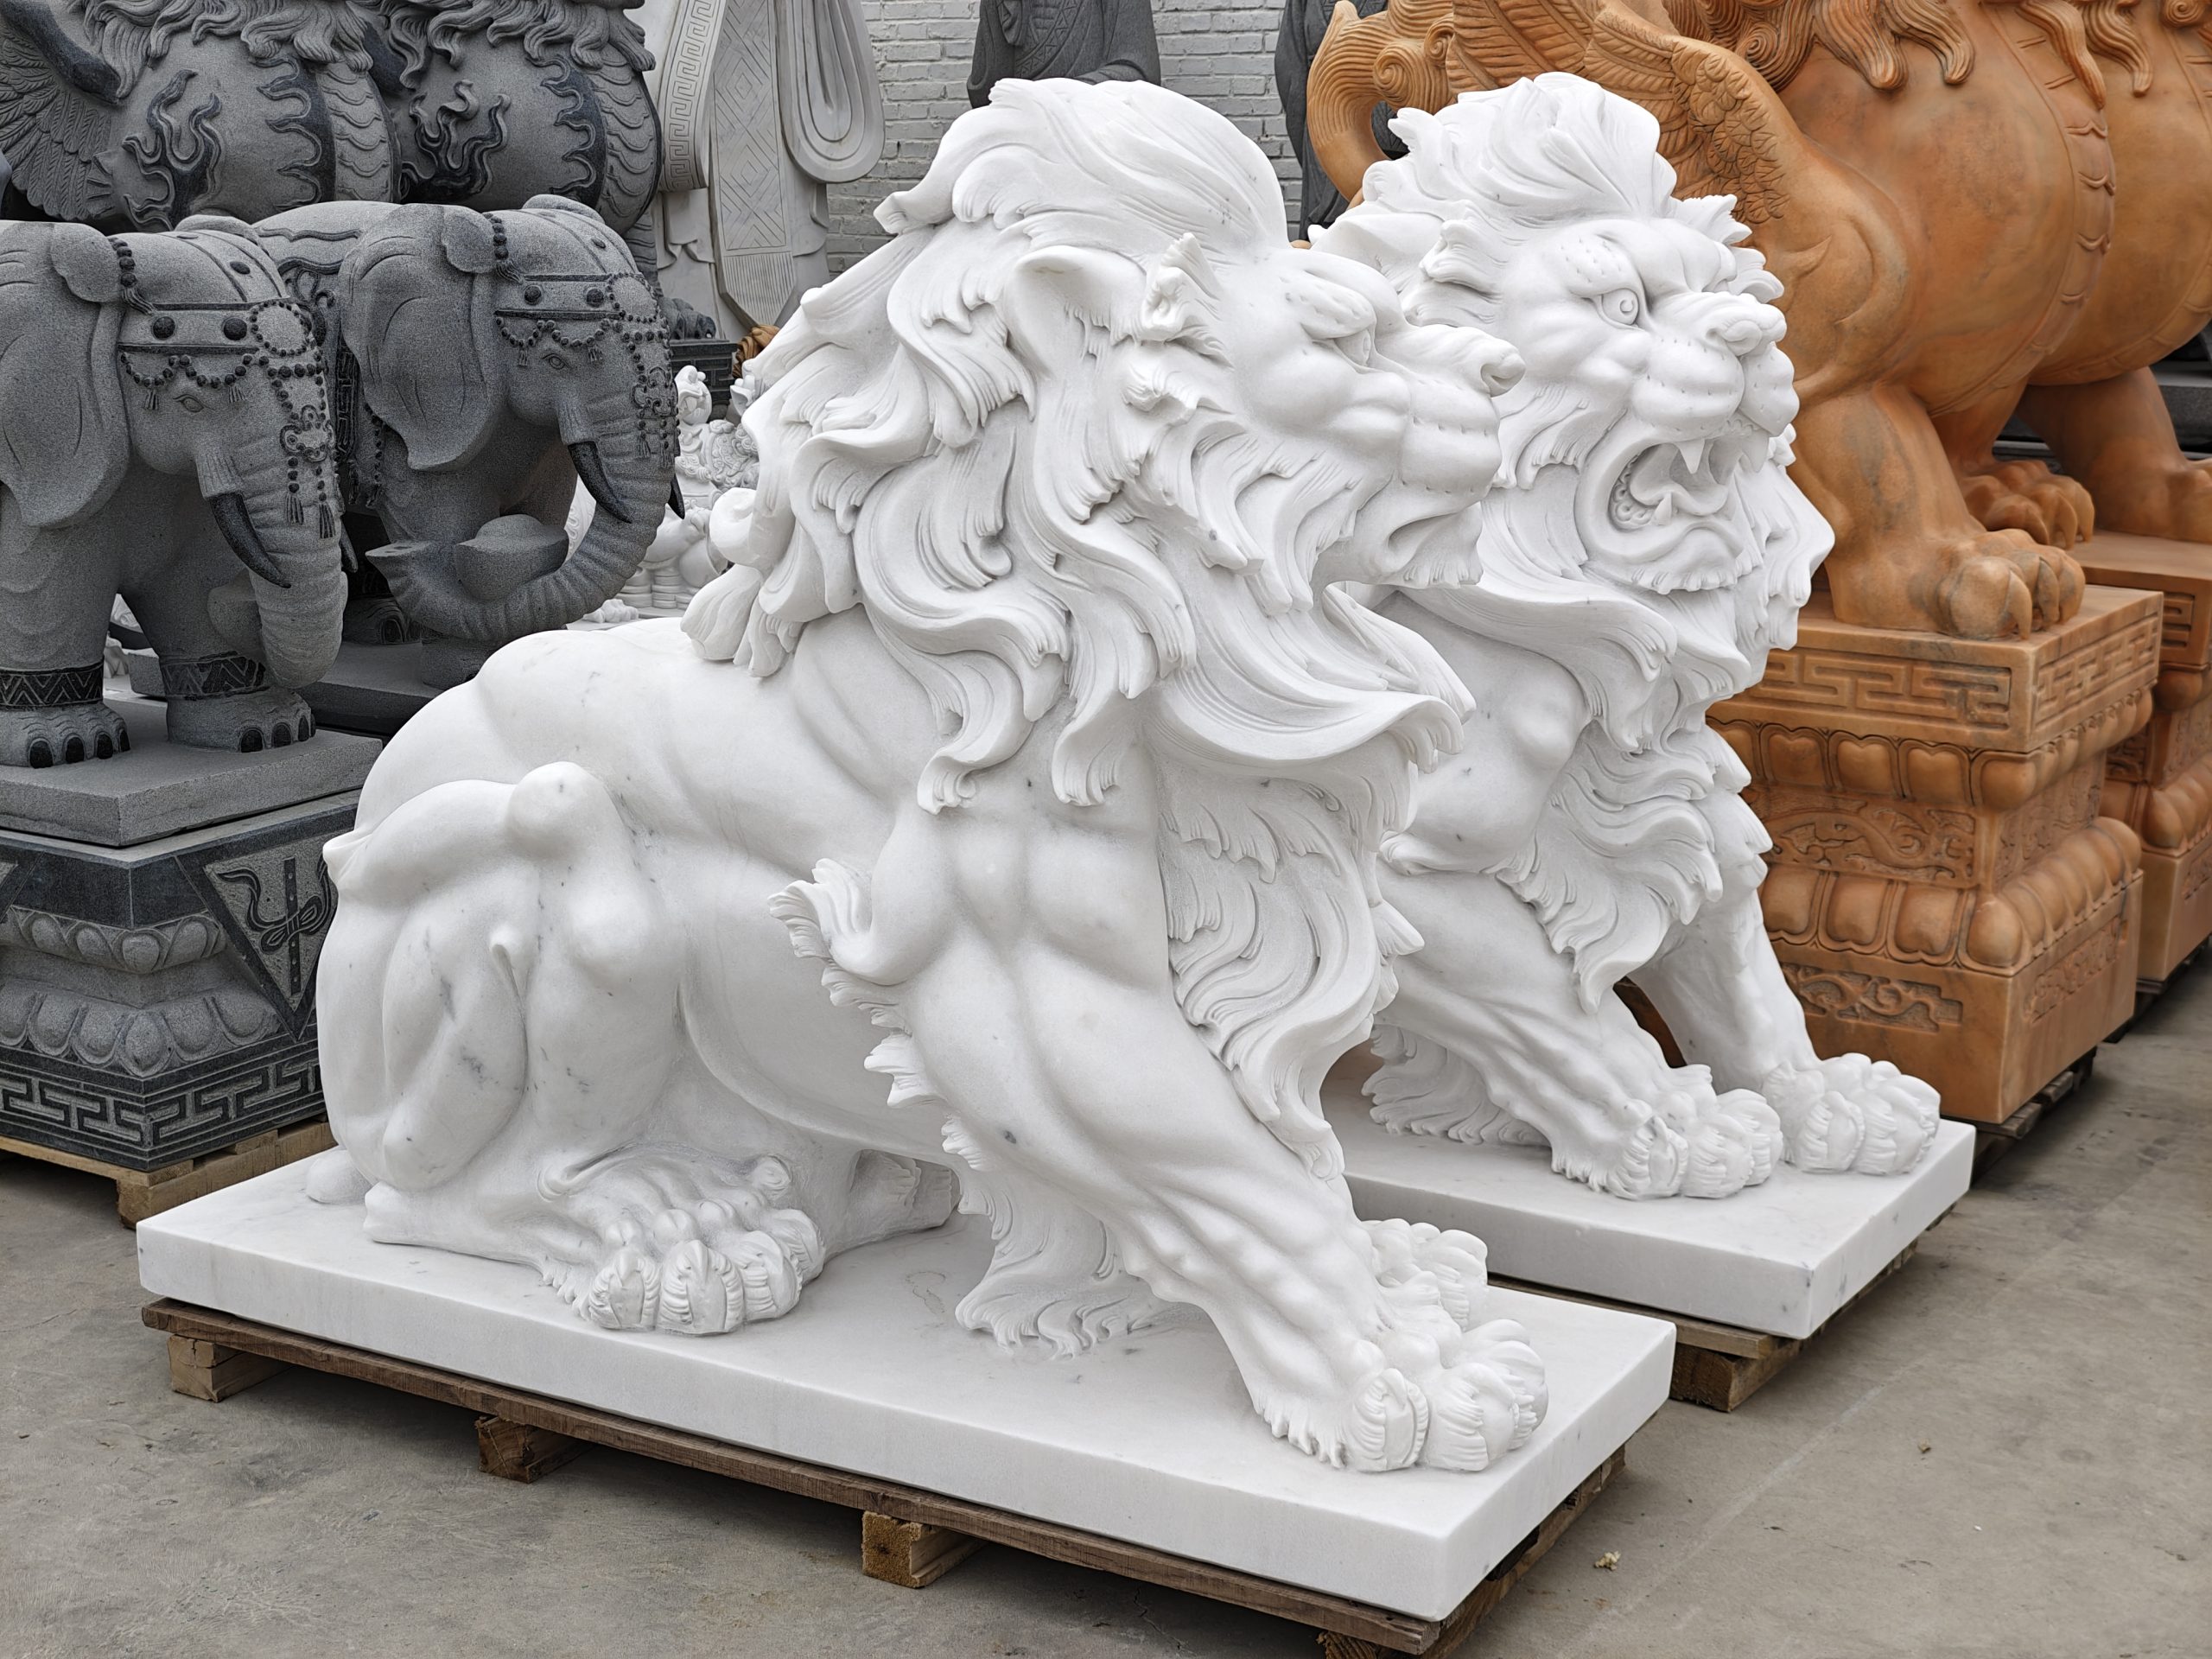 The Significant Symbolism of the Lion Statue